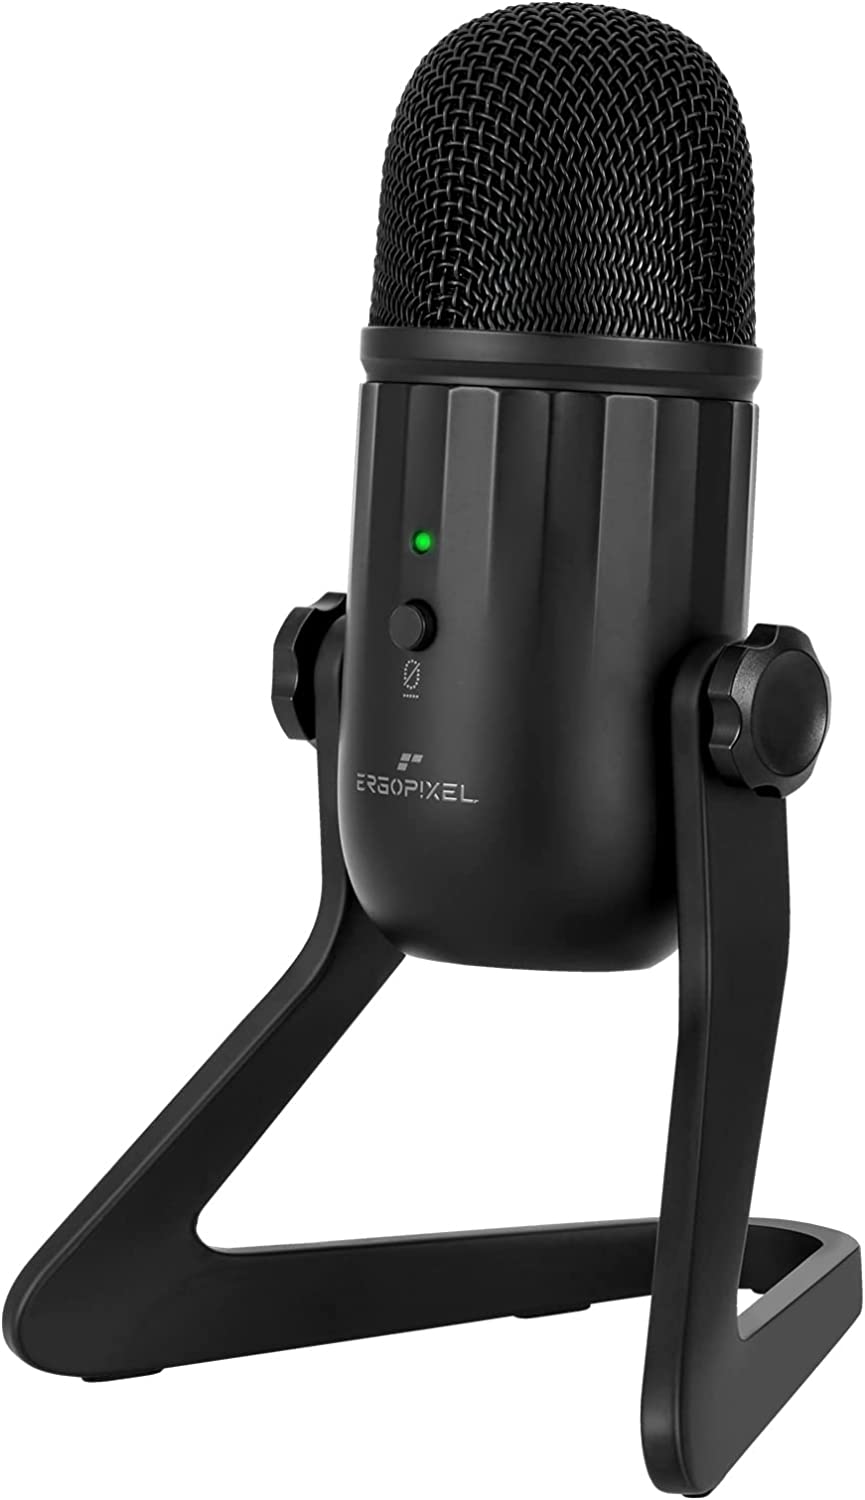 USB Computer Microphone with Mute Button, Plug&Play Condenser